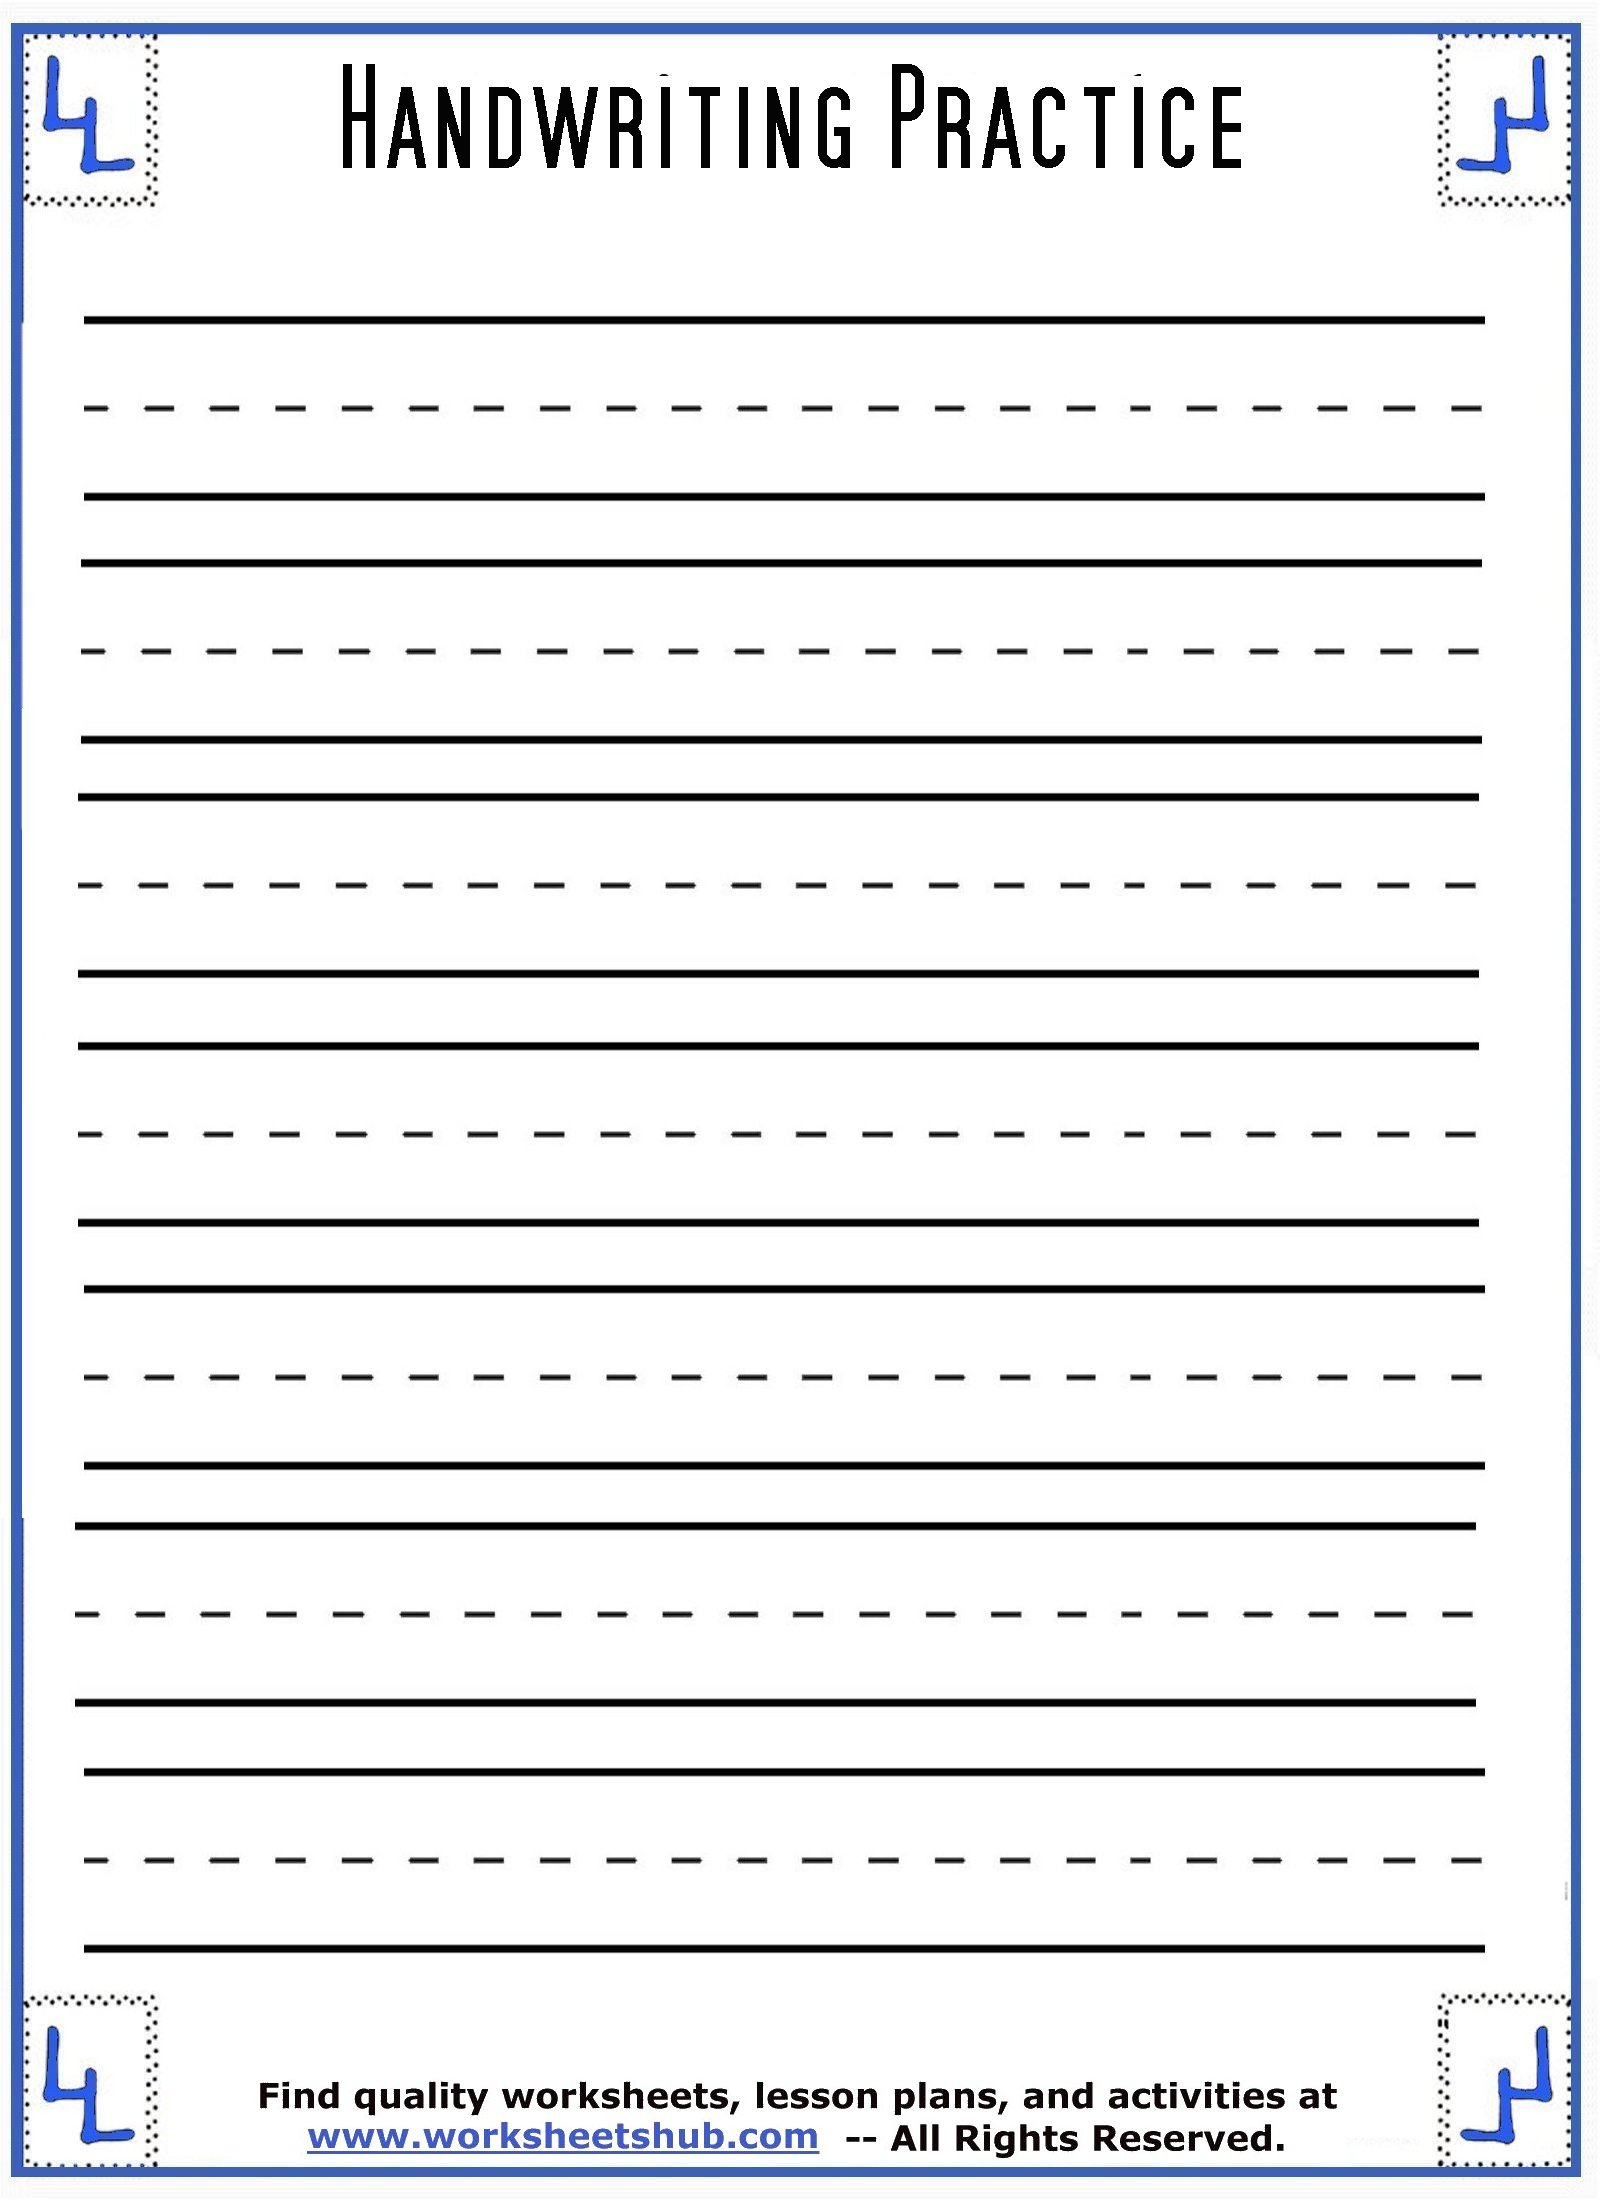 Handwriting Sheets:printable 3-Lined Paper within Blank Handwriting Worksheets Printable Free